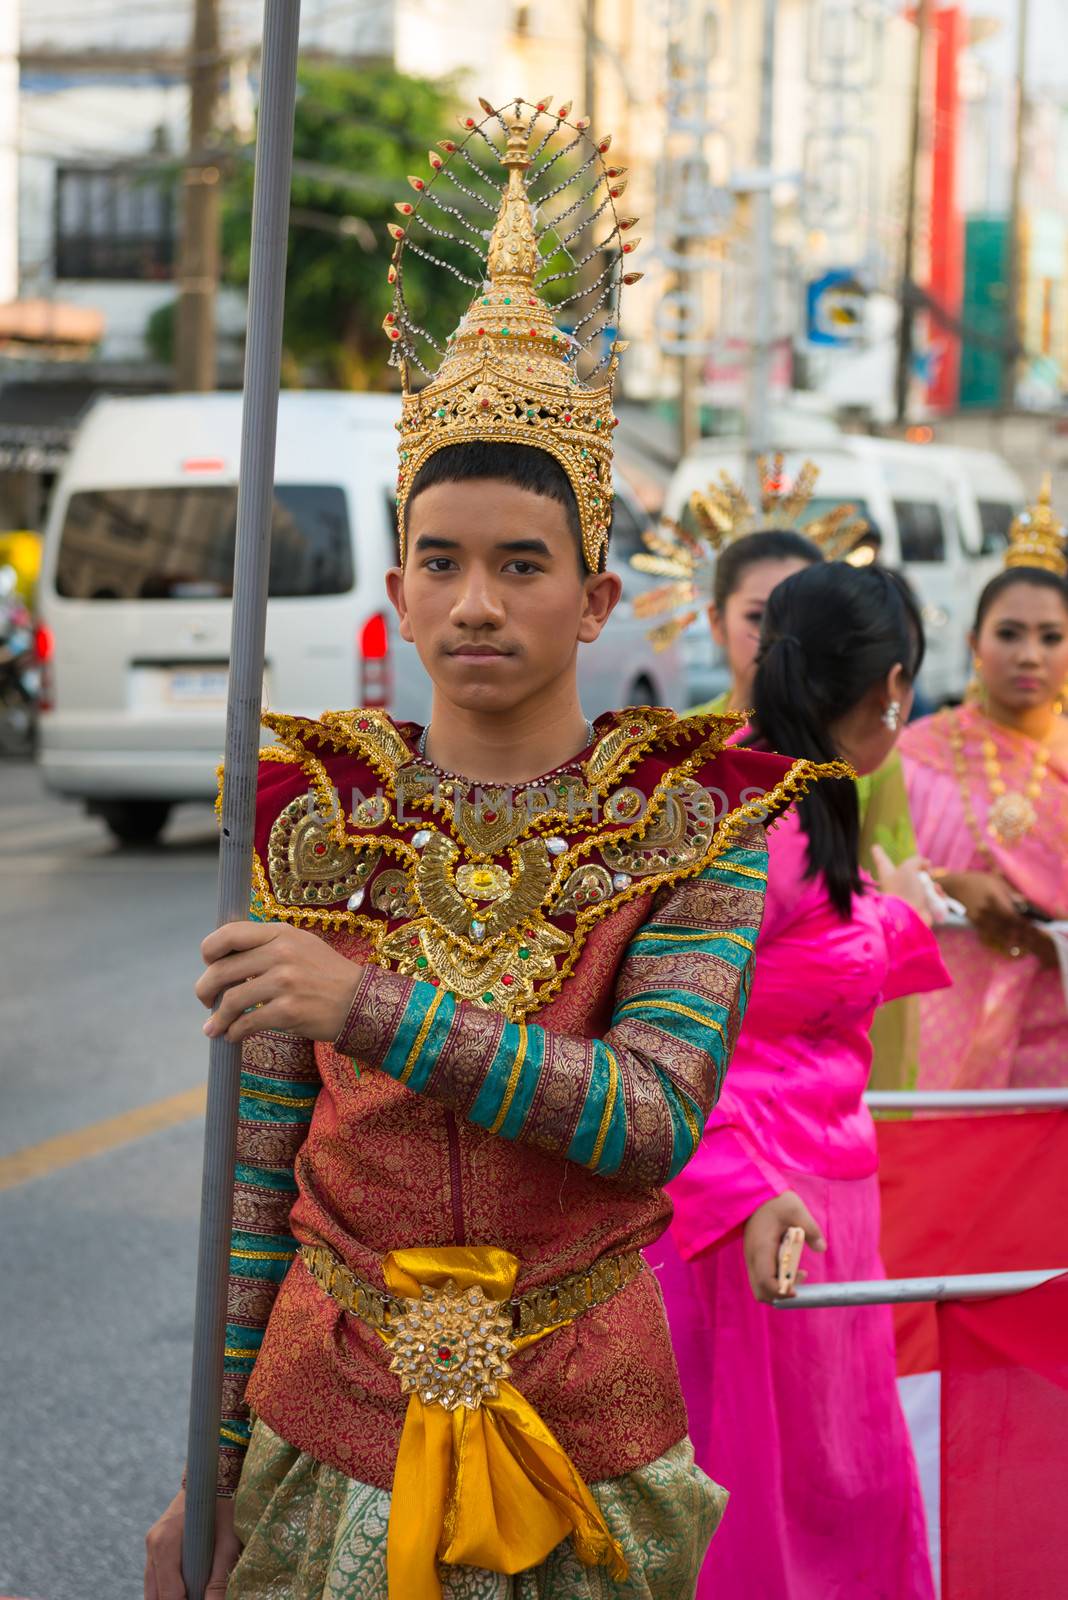 PHUKET, THAILAND - 07 FEB 2014: Phuket town residents take part in procession parade of annual old Phuket town festival. 